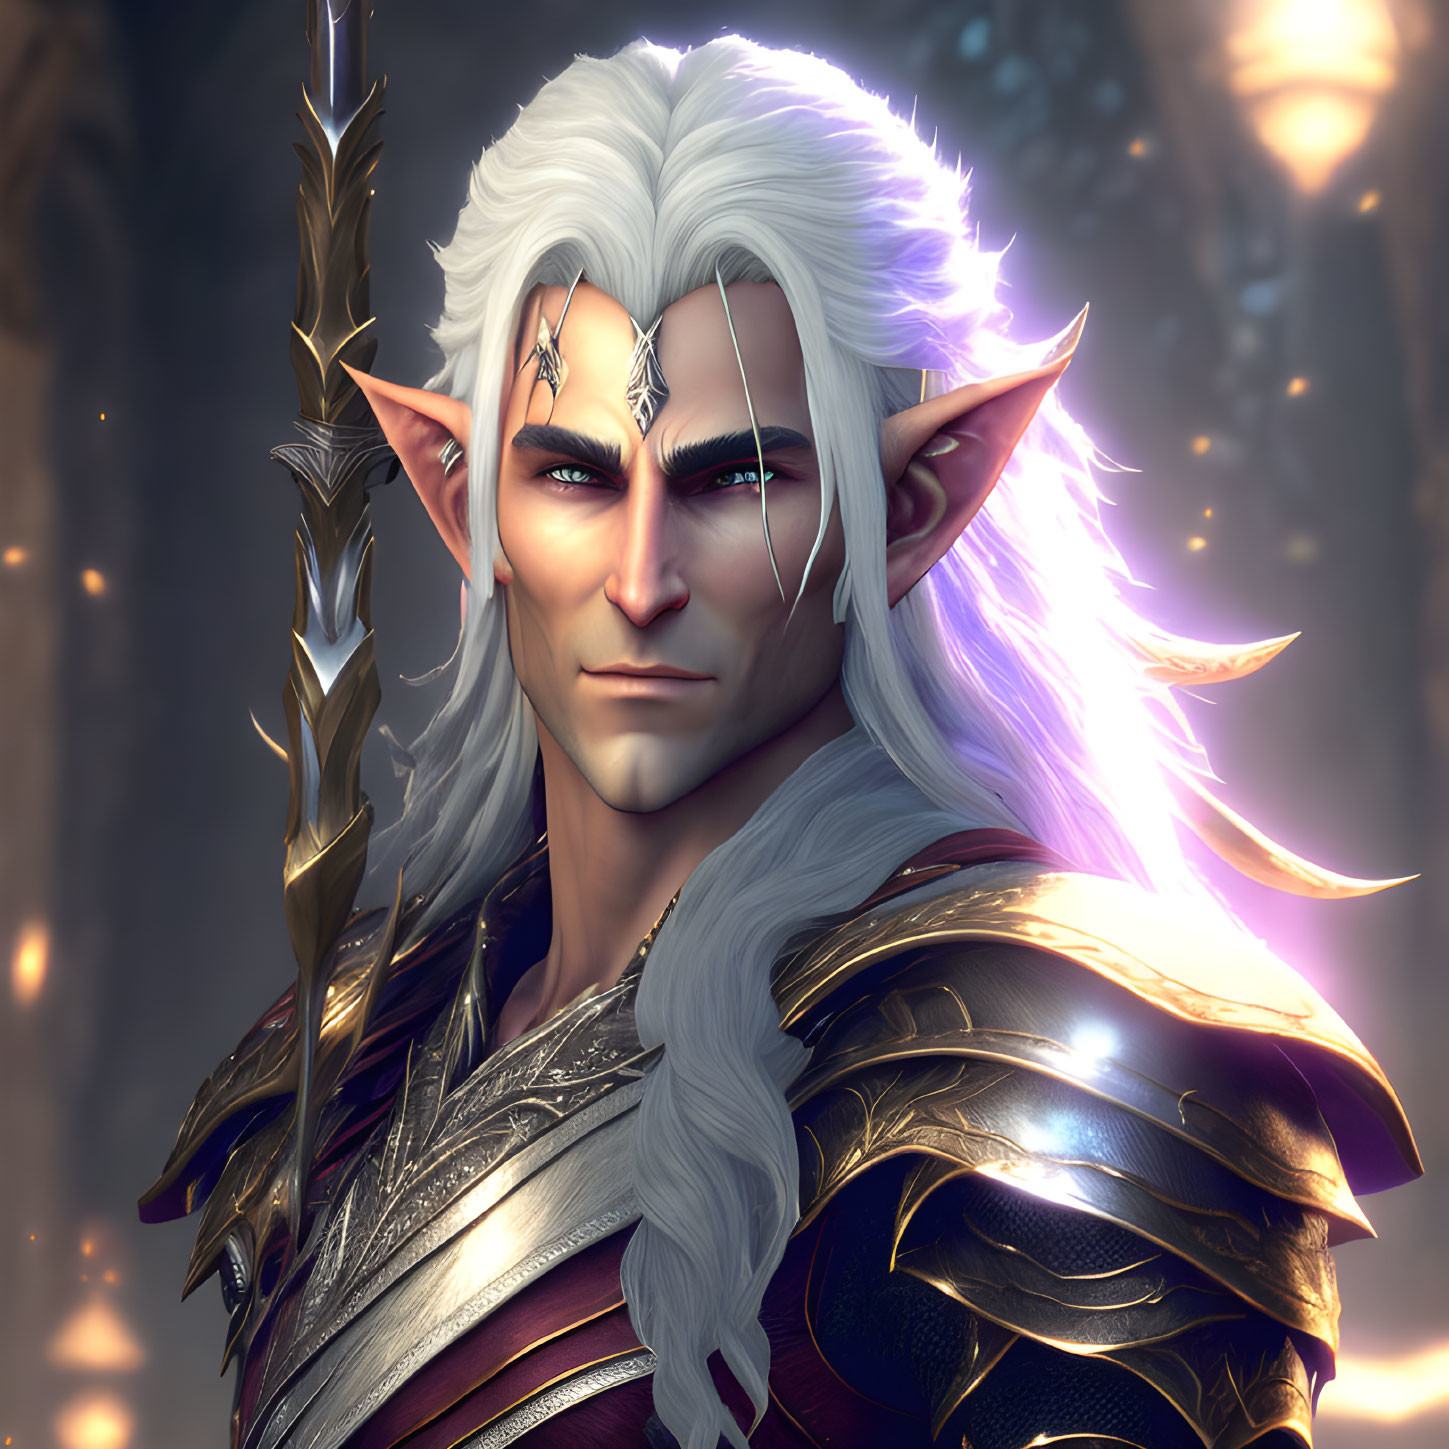 Ethereal male elf with white hair and ornate armor in mystical setting